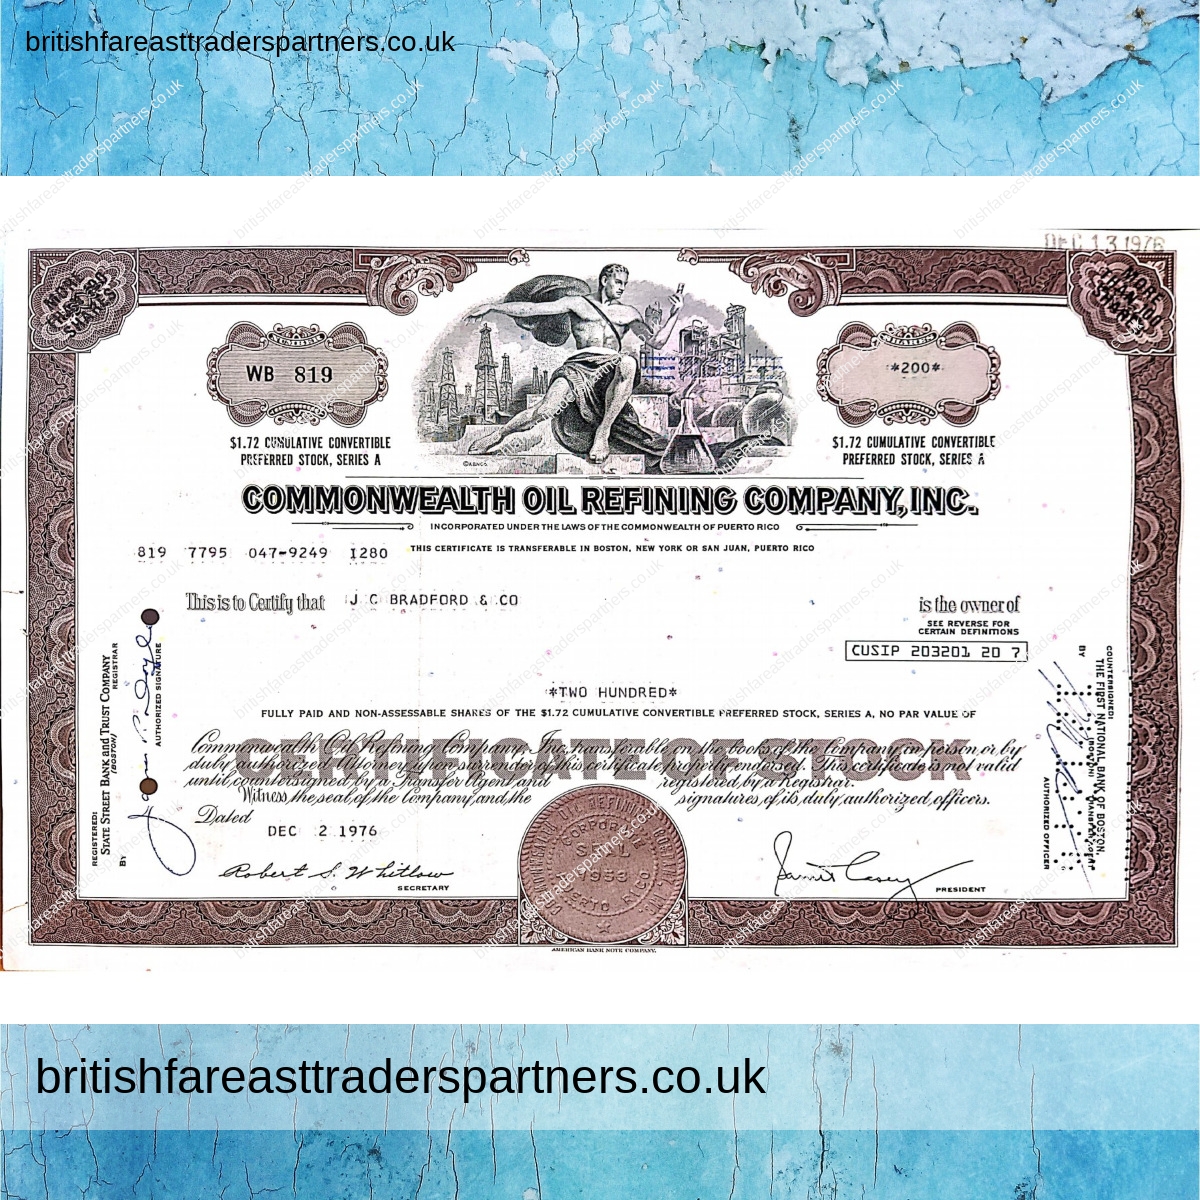 VINTAGE STOCK / SHARE CERTIFICATE “COMMONWEALTH OIL REFINING COMPANY INC.” COLLECTABLE DOCUMENTS | SHARE CERTIFICATES | COMPANIES | WORLD | SCRIPOPHILY | BUSINESS | INVESTMENTS